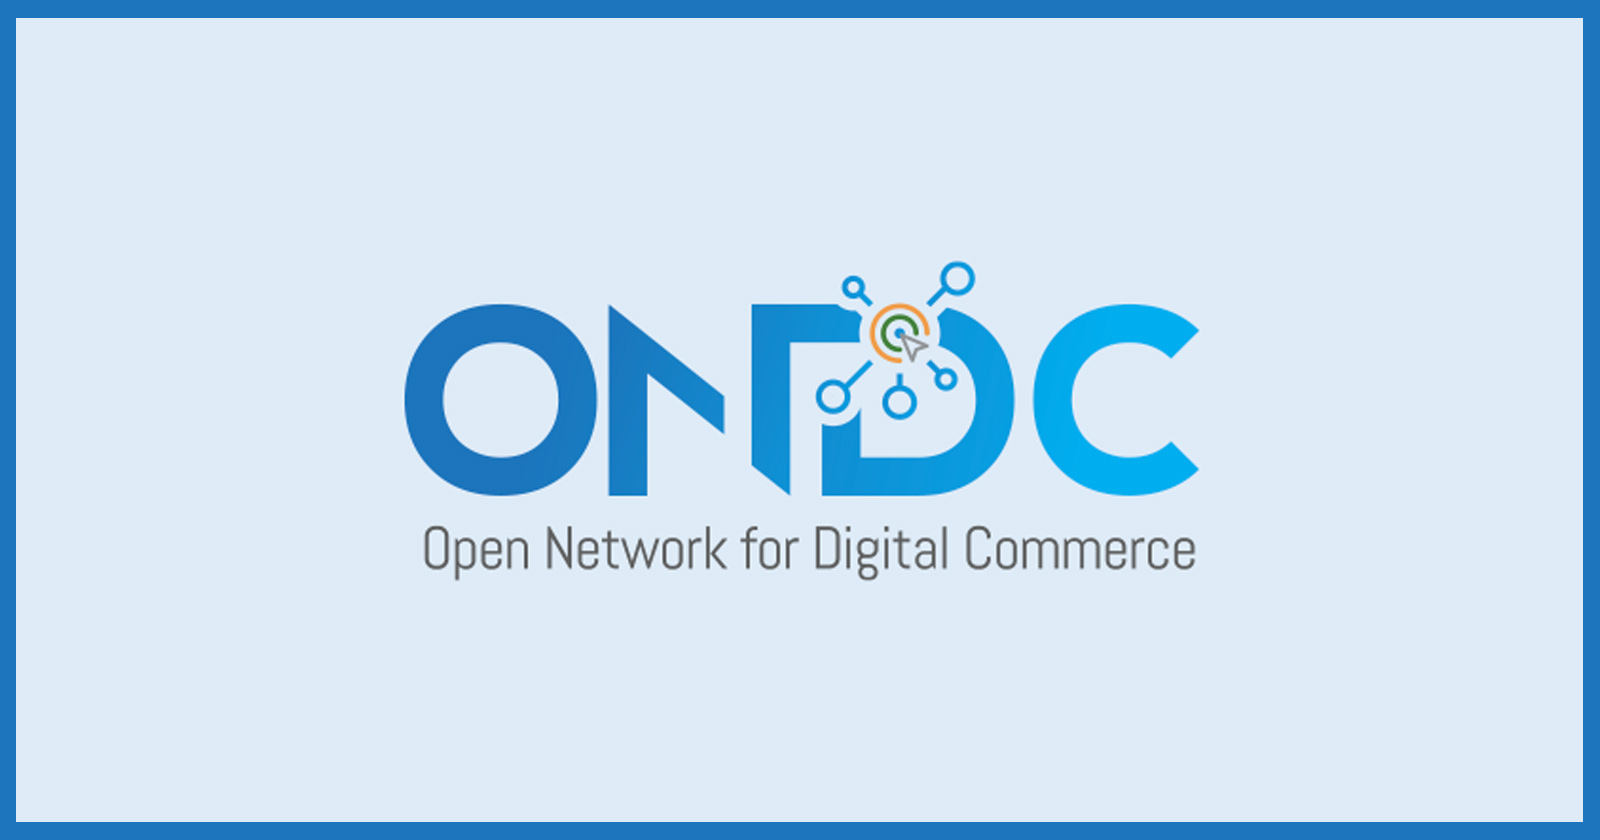 Ministry of Commerce - Ministry of Commerce and Industry - ONDC - Lowers Entry Barriers to Digital Commerce - Lowers Entry Barriers - Lowers Entry - Digital Commerce - taxscan